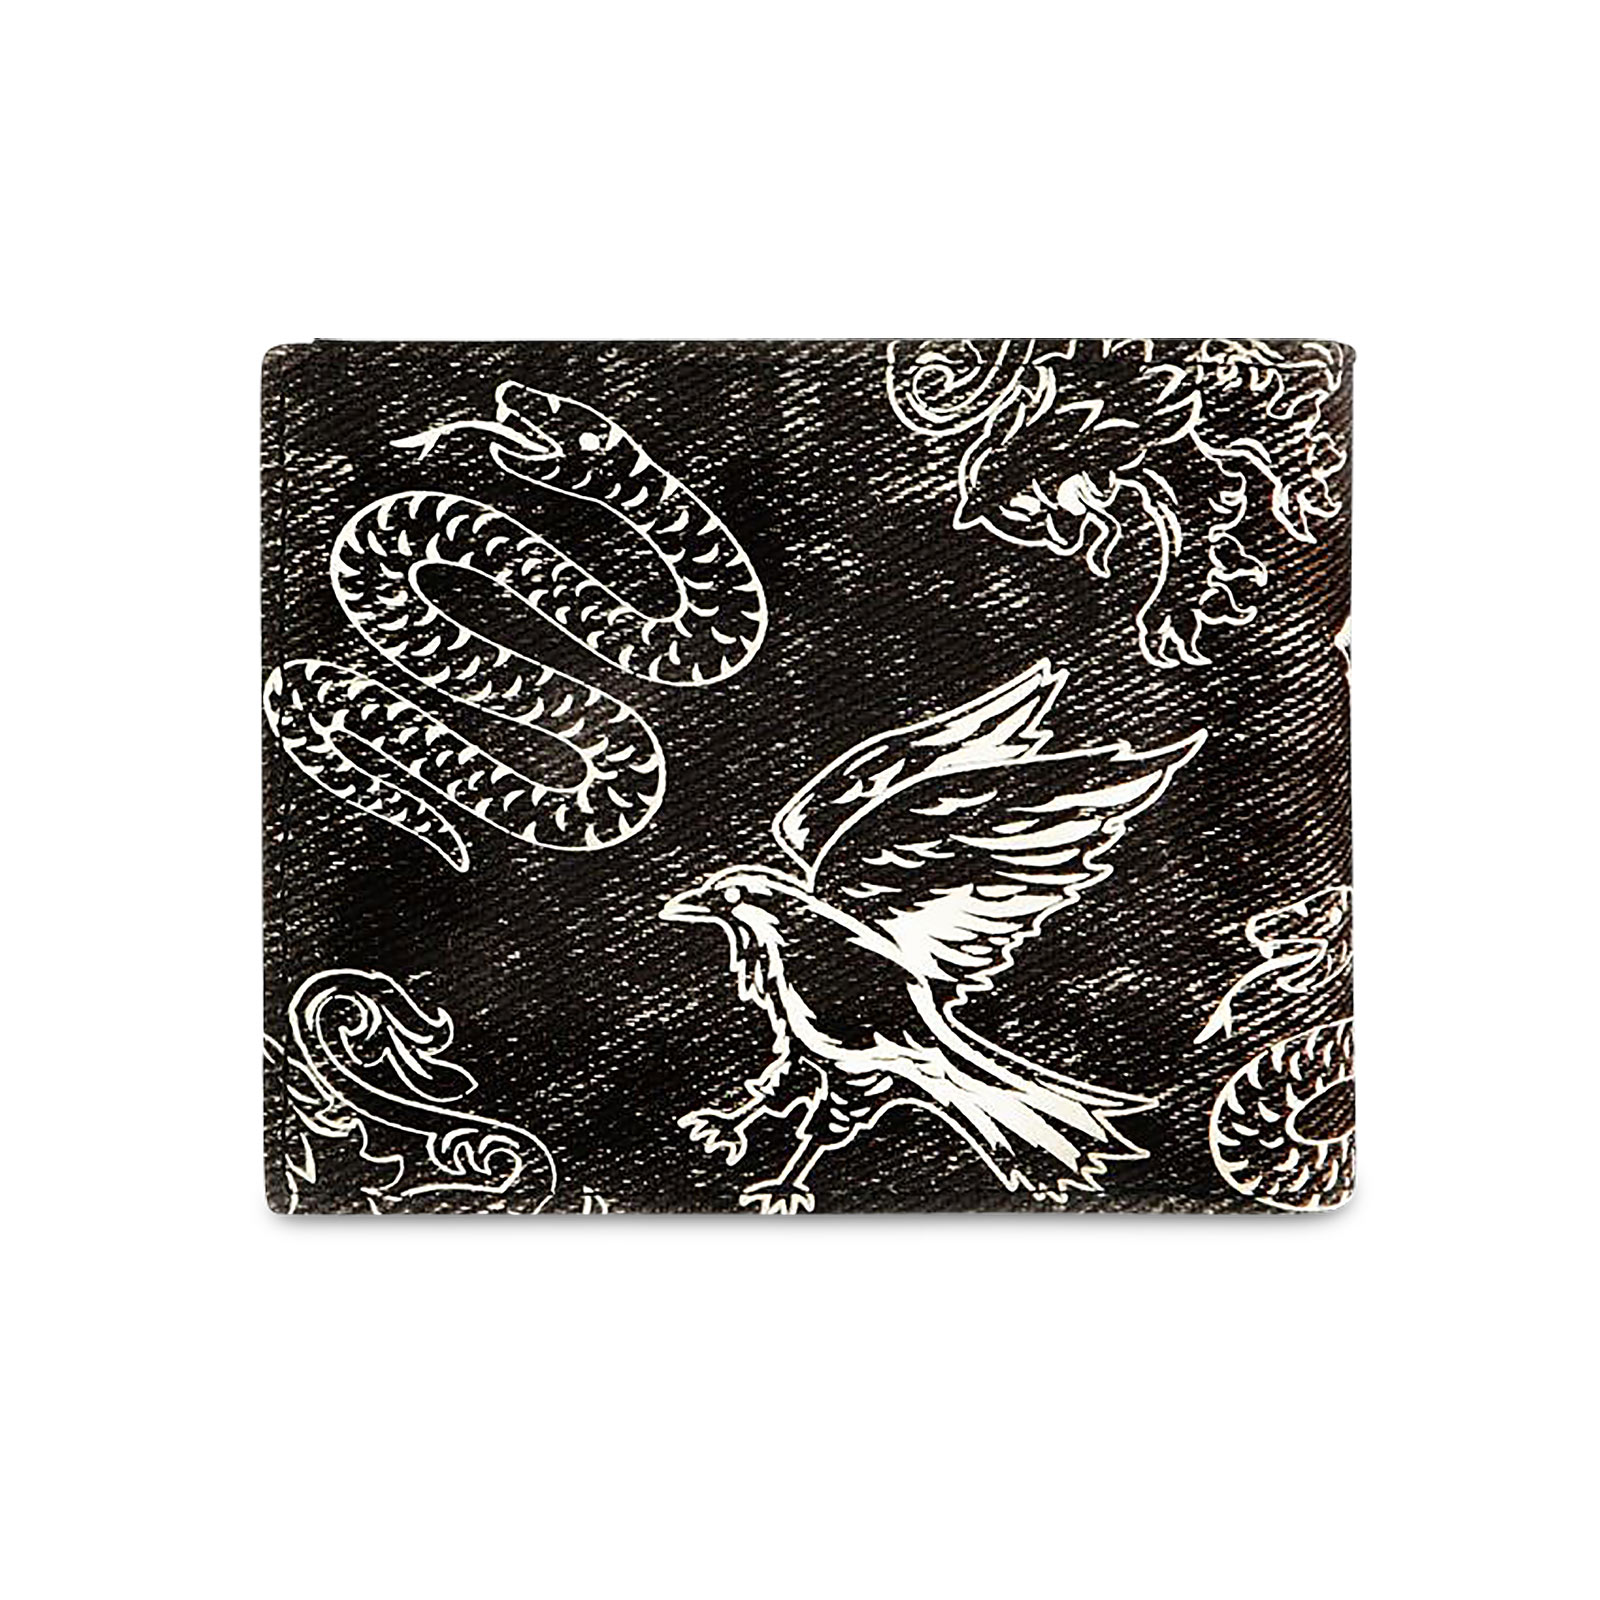 Harry Potter - Black and White House Crests Wallet